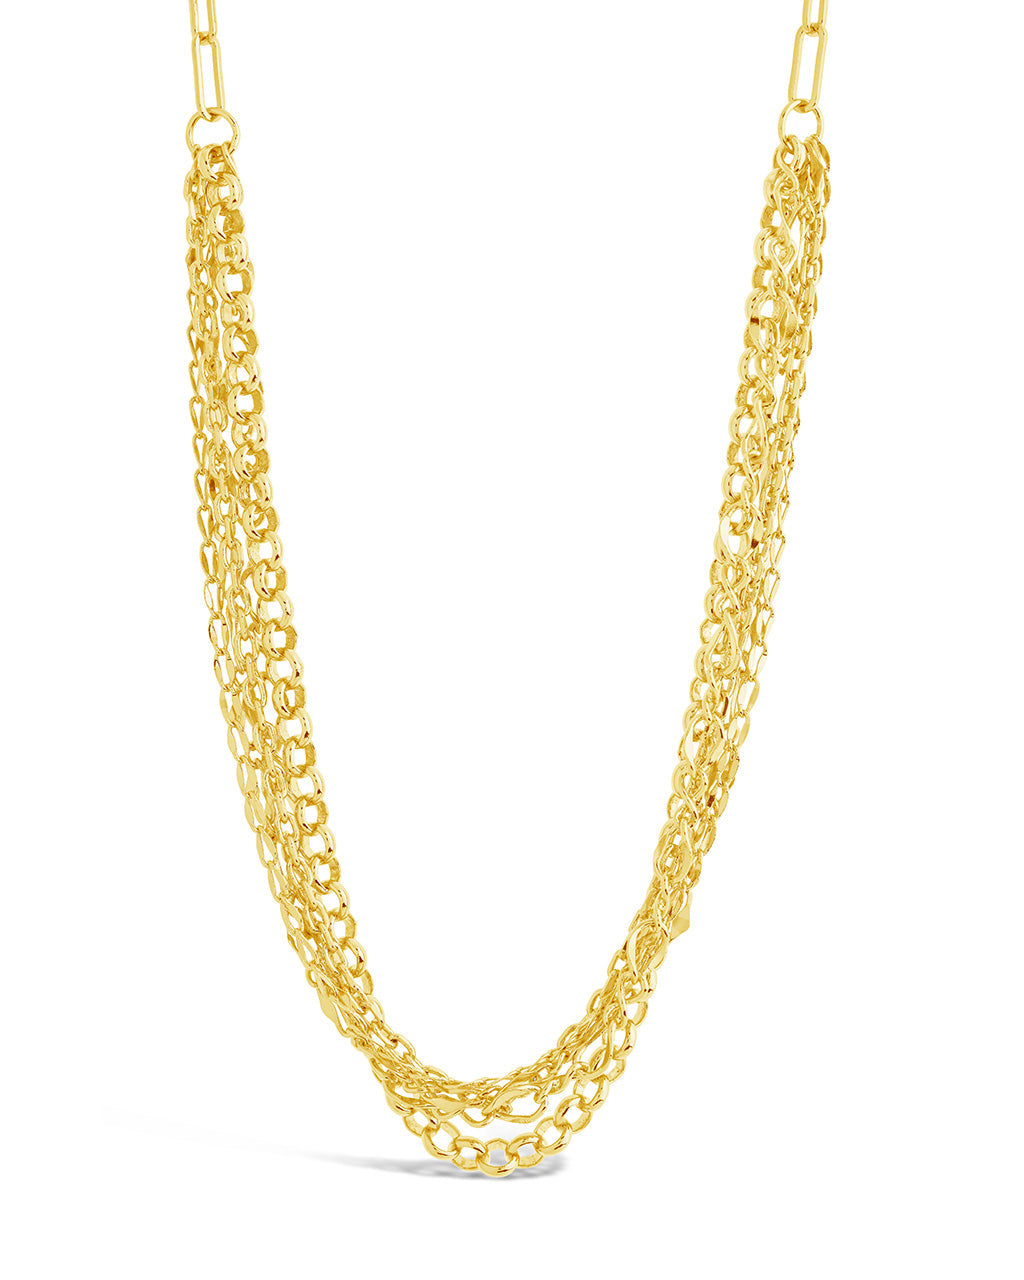 Hadleigh Layered Necklace Necklace Sterling Forever Gold 